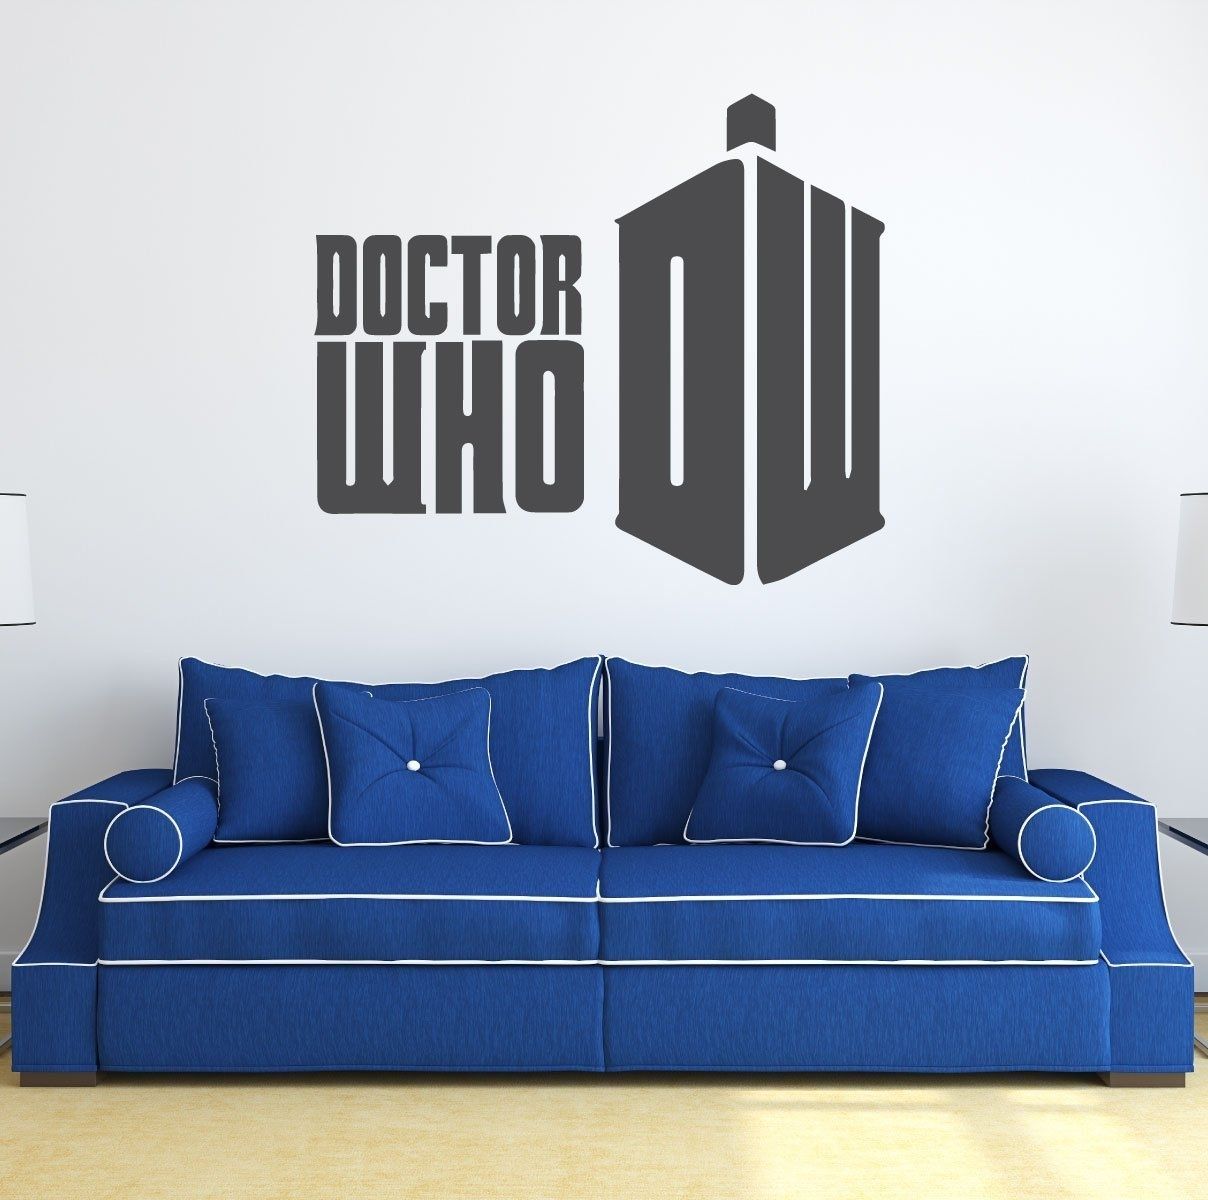 Doctor Who Wall Art – Doctor Who Dw – Whovian Gifts In Doctor Who Wall Art (View 6 of 20)